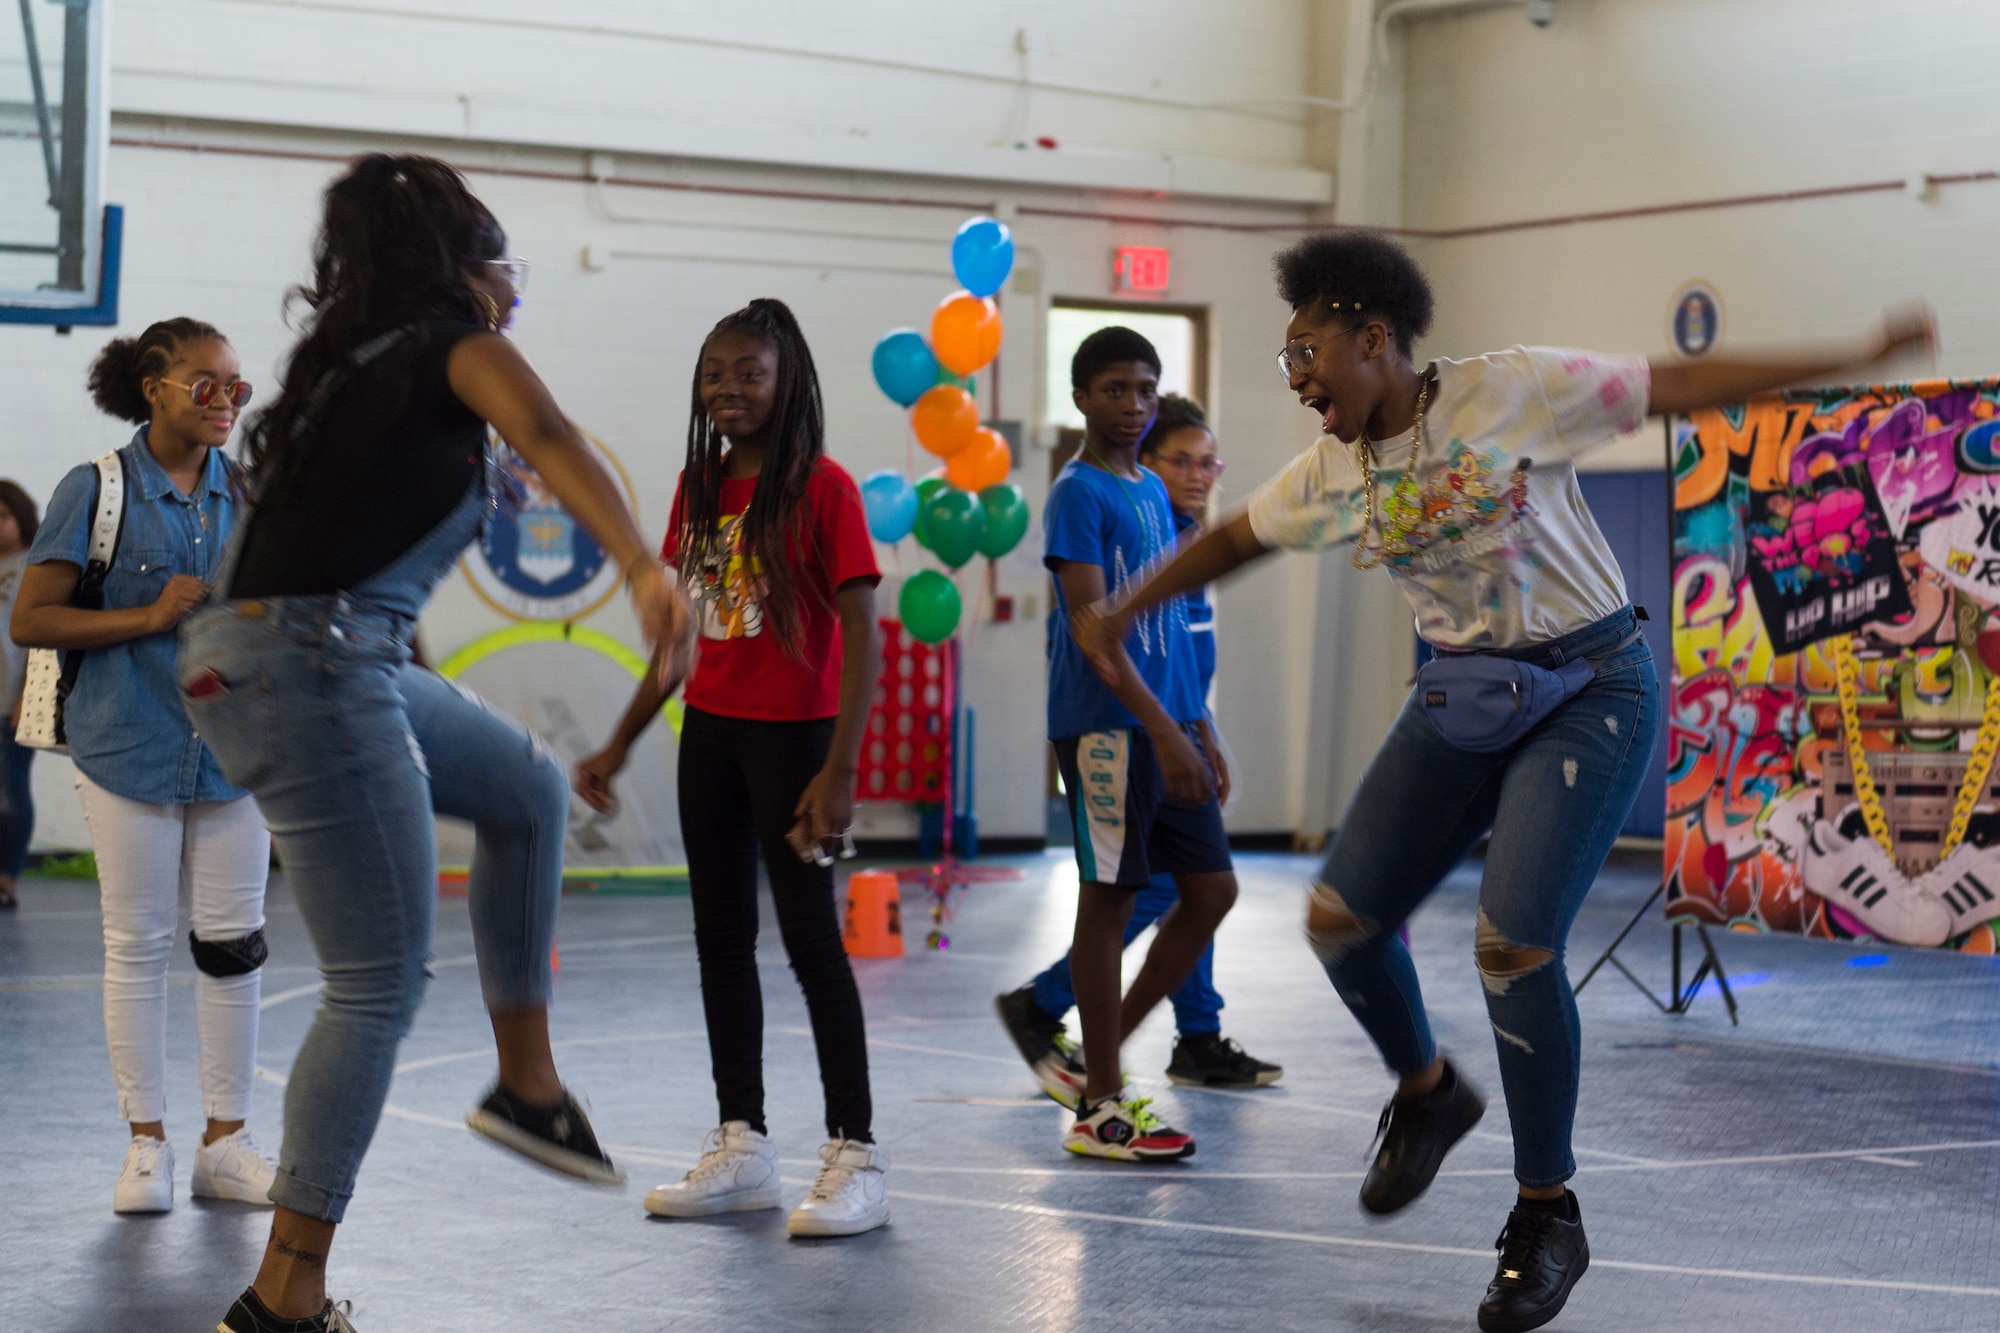 Participants dance during a youth dance party, April 12, 2019, at Moody Air Force Base, Ga. Team Moody showed its support for military children by hosting a number of events during Month of the Military Child in April. (U.S. Air Force photo by Airman 1st Class Hayden Legg)